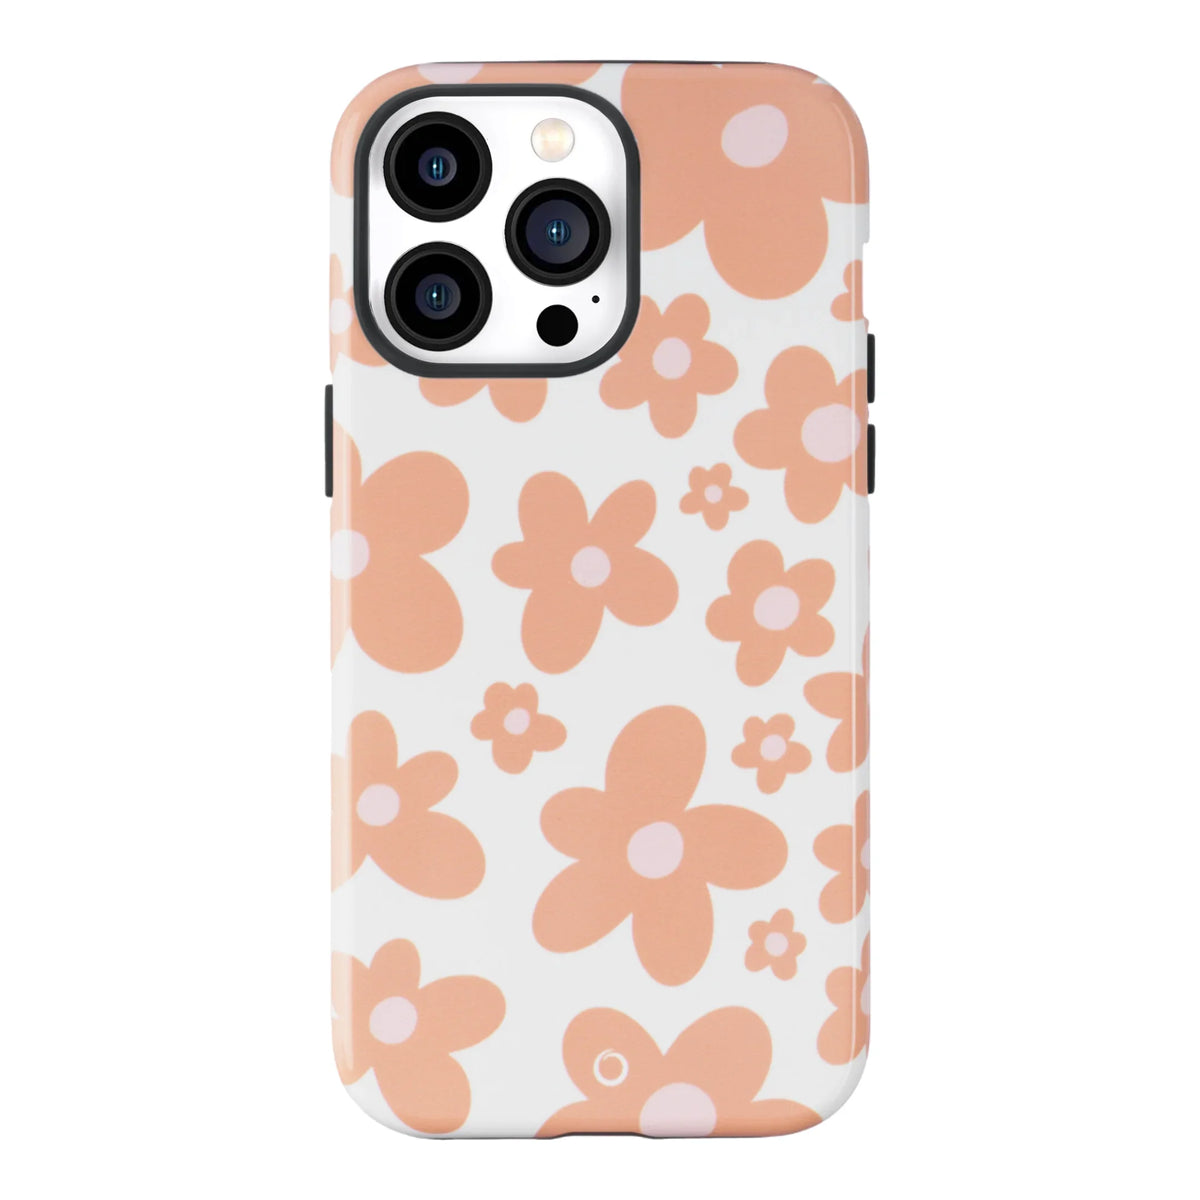 Floral Fiesta iPhone Case - Select a Device